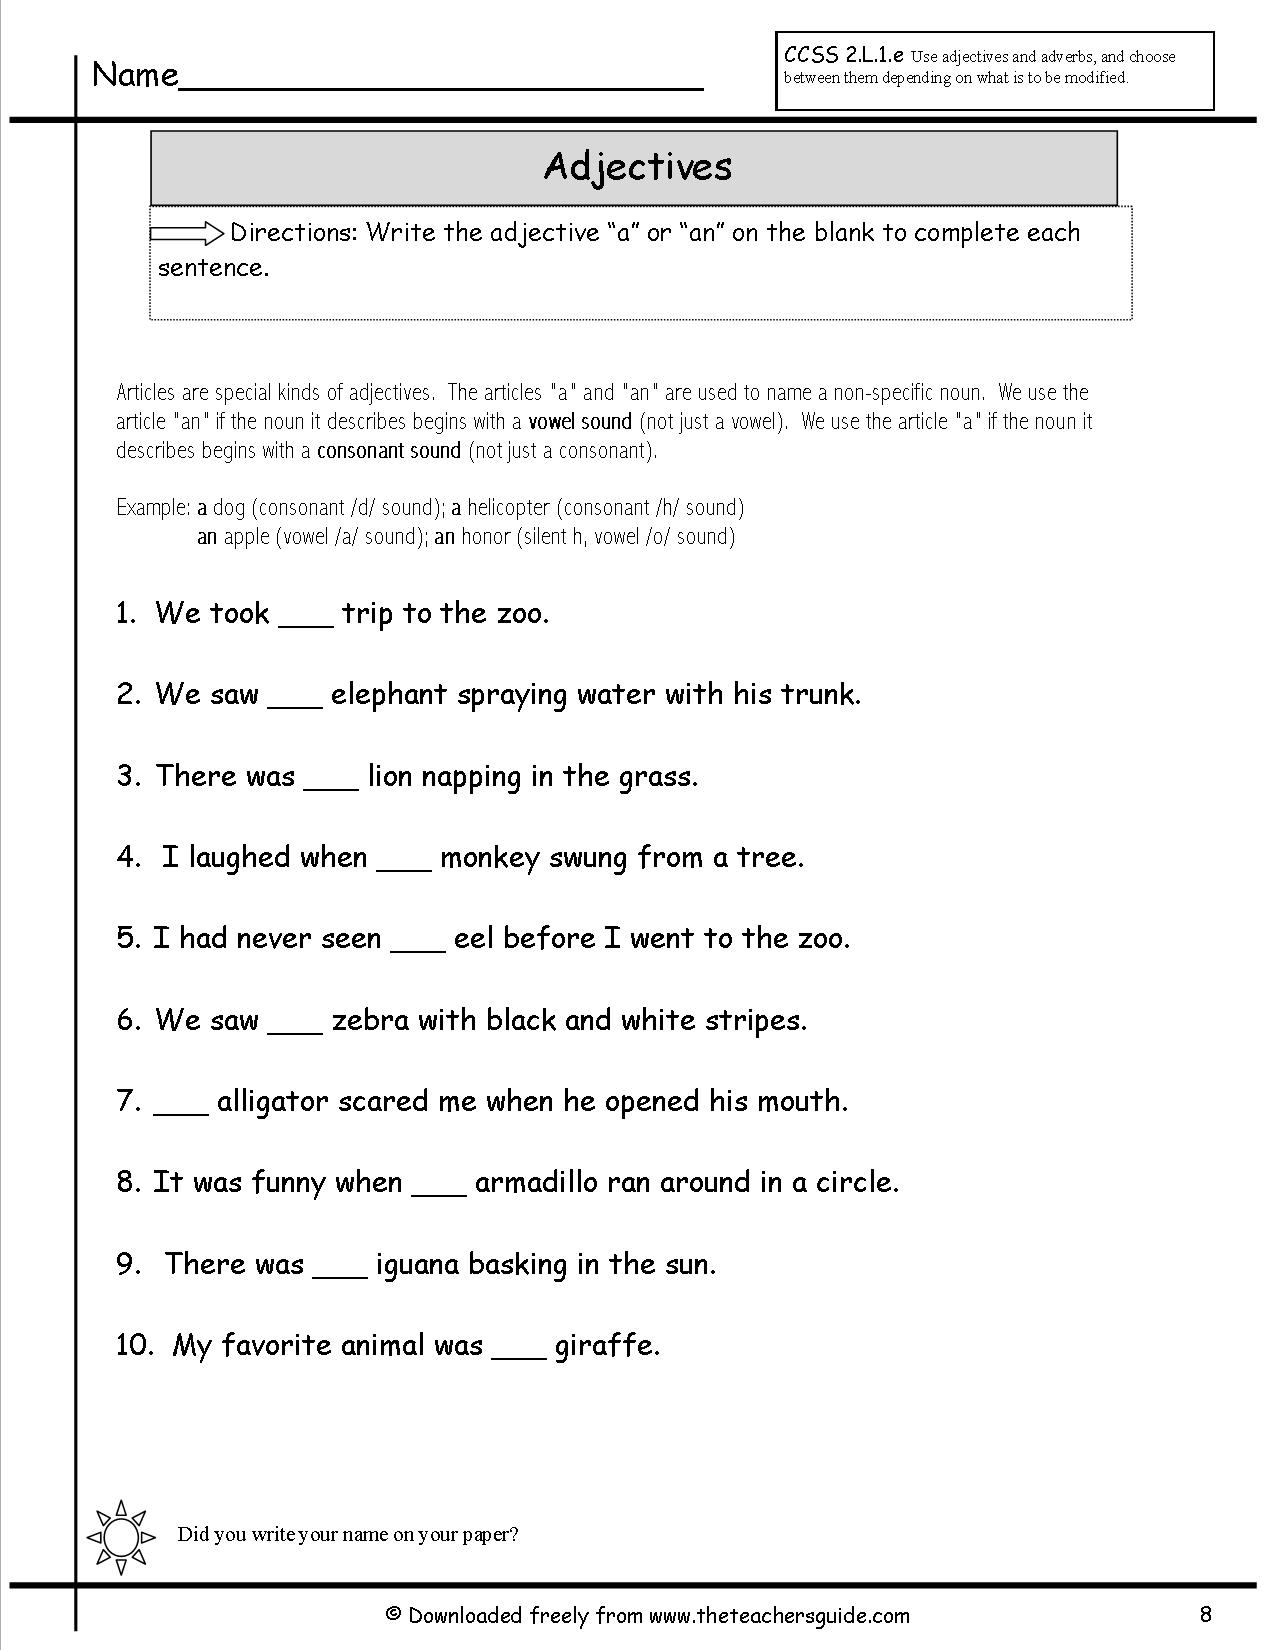 15-best-images-of-nouns-and-adjectives-worksheets-identifying-nouns